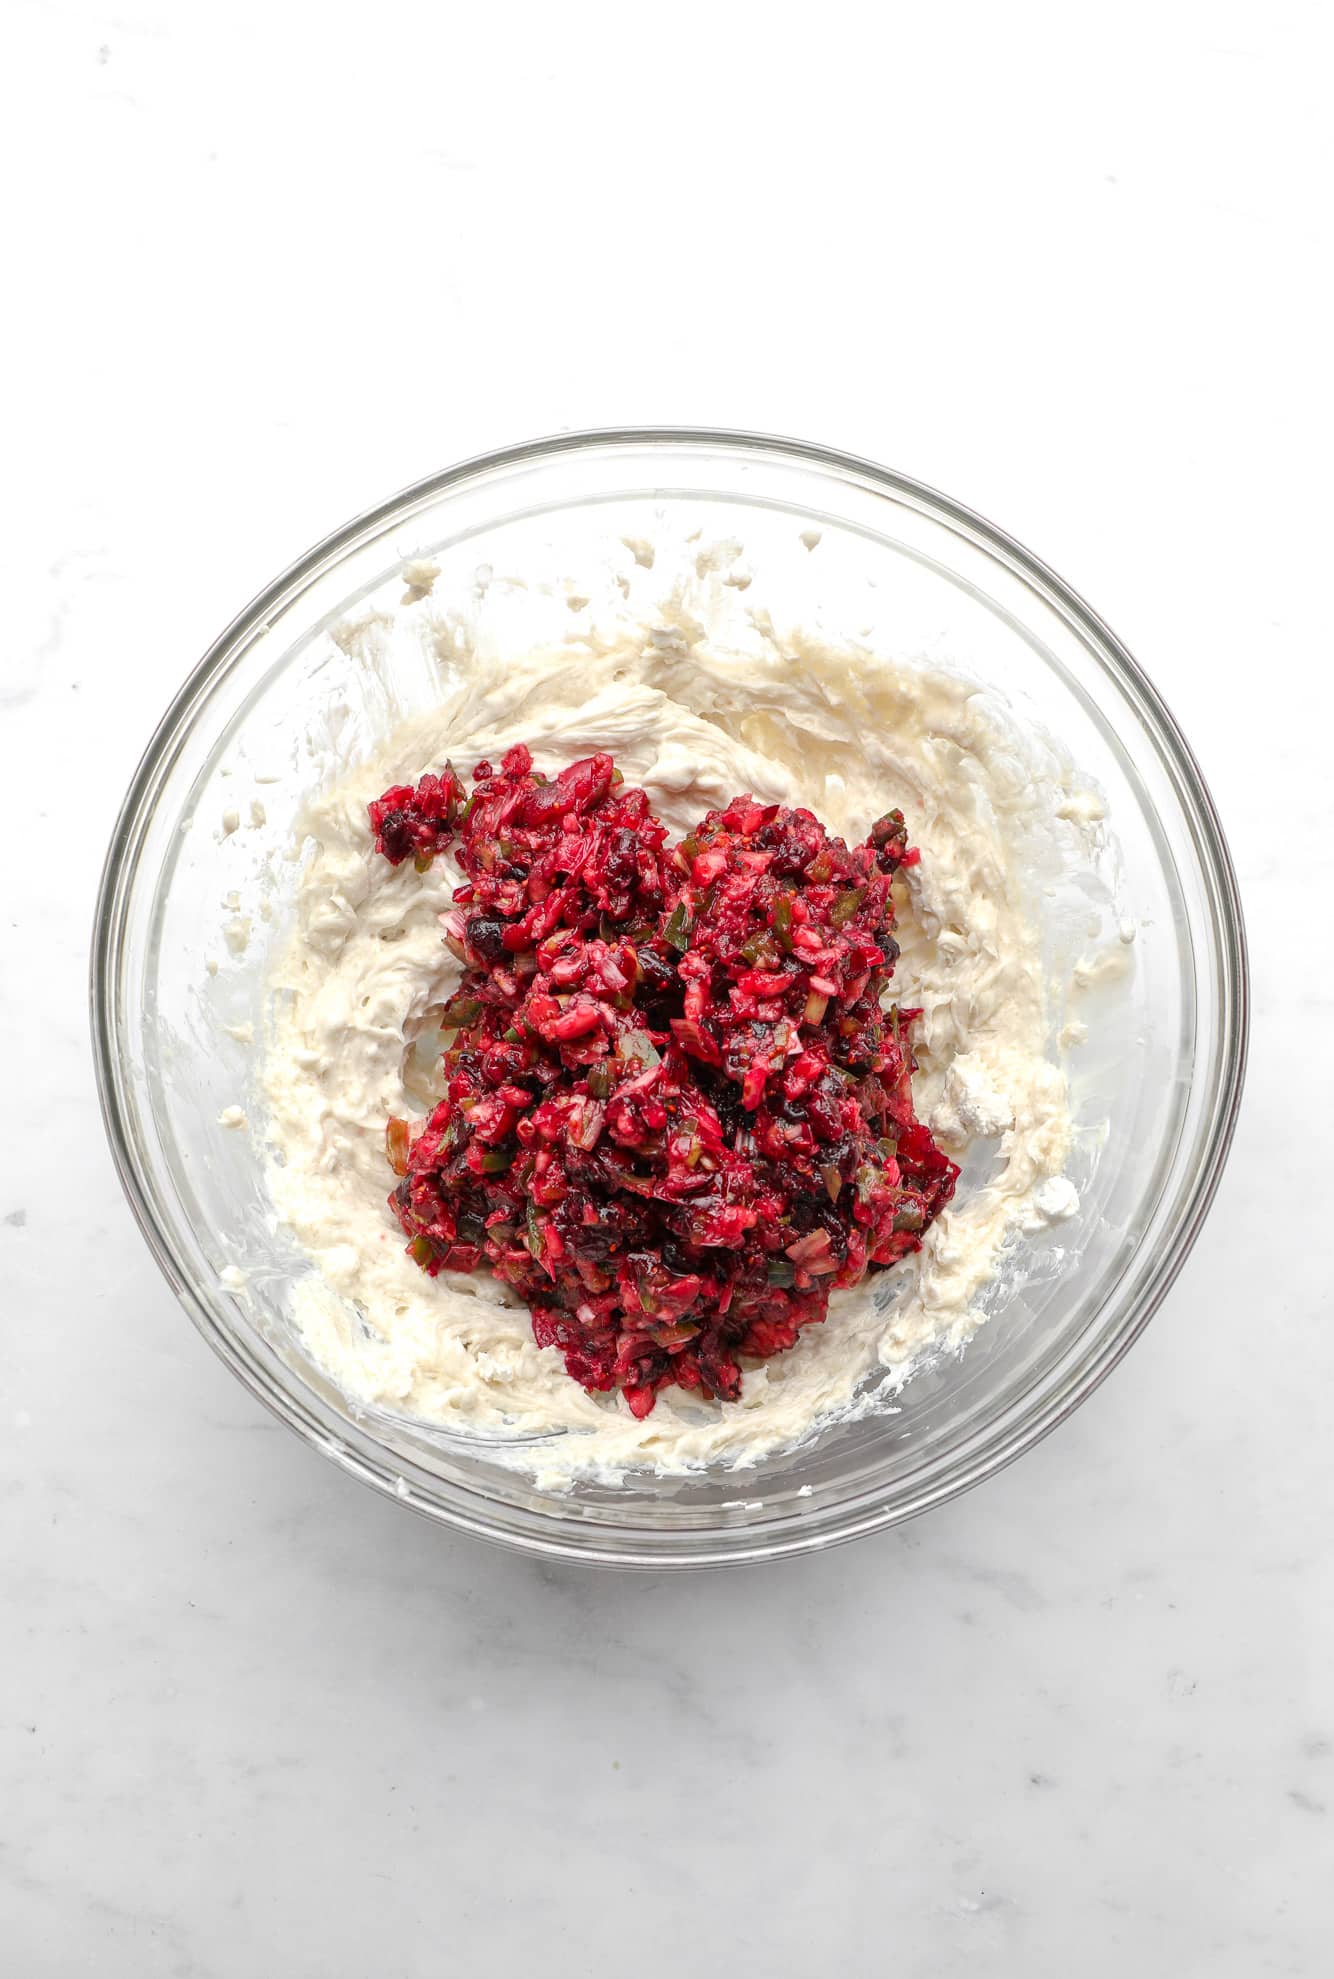 blended cranberries and jalapenos on top of whipped cream cheese in a glass bowl.